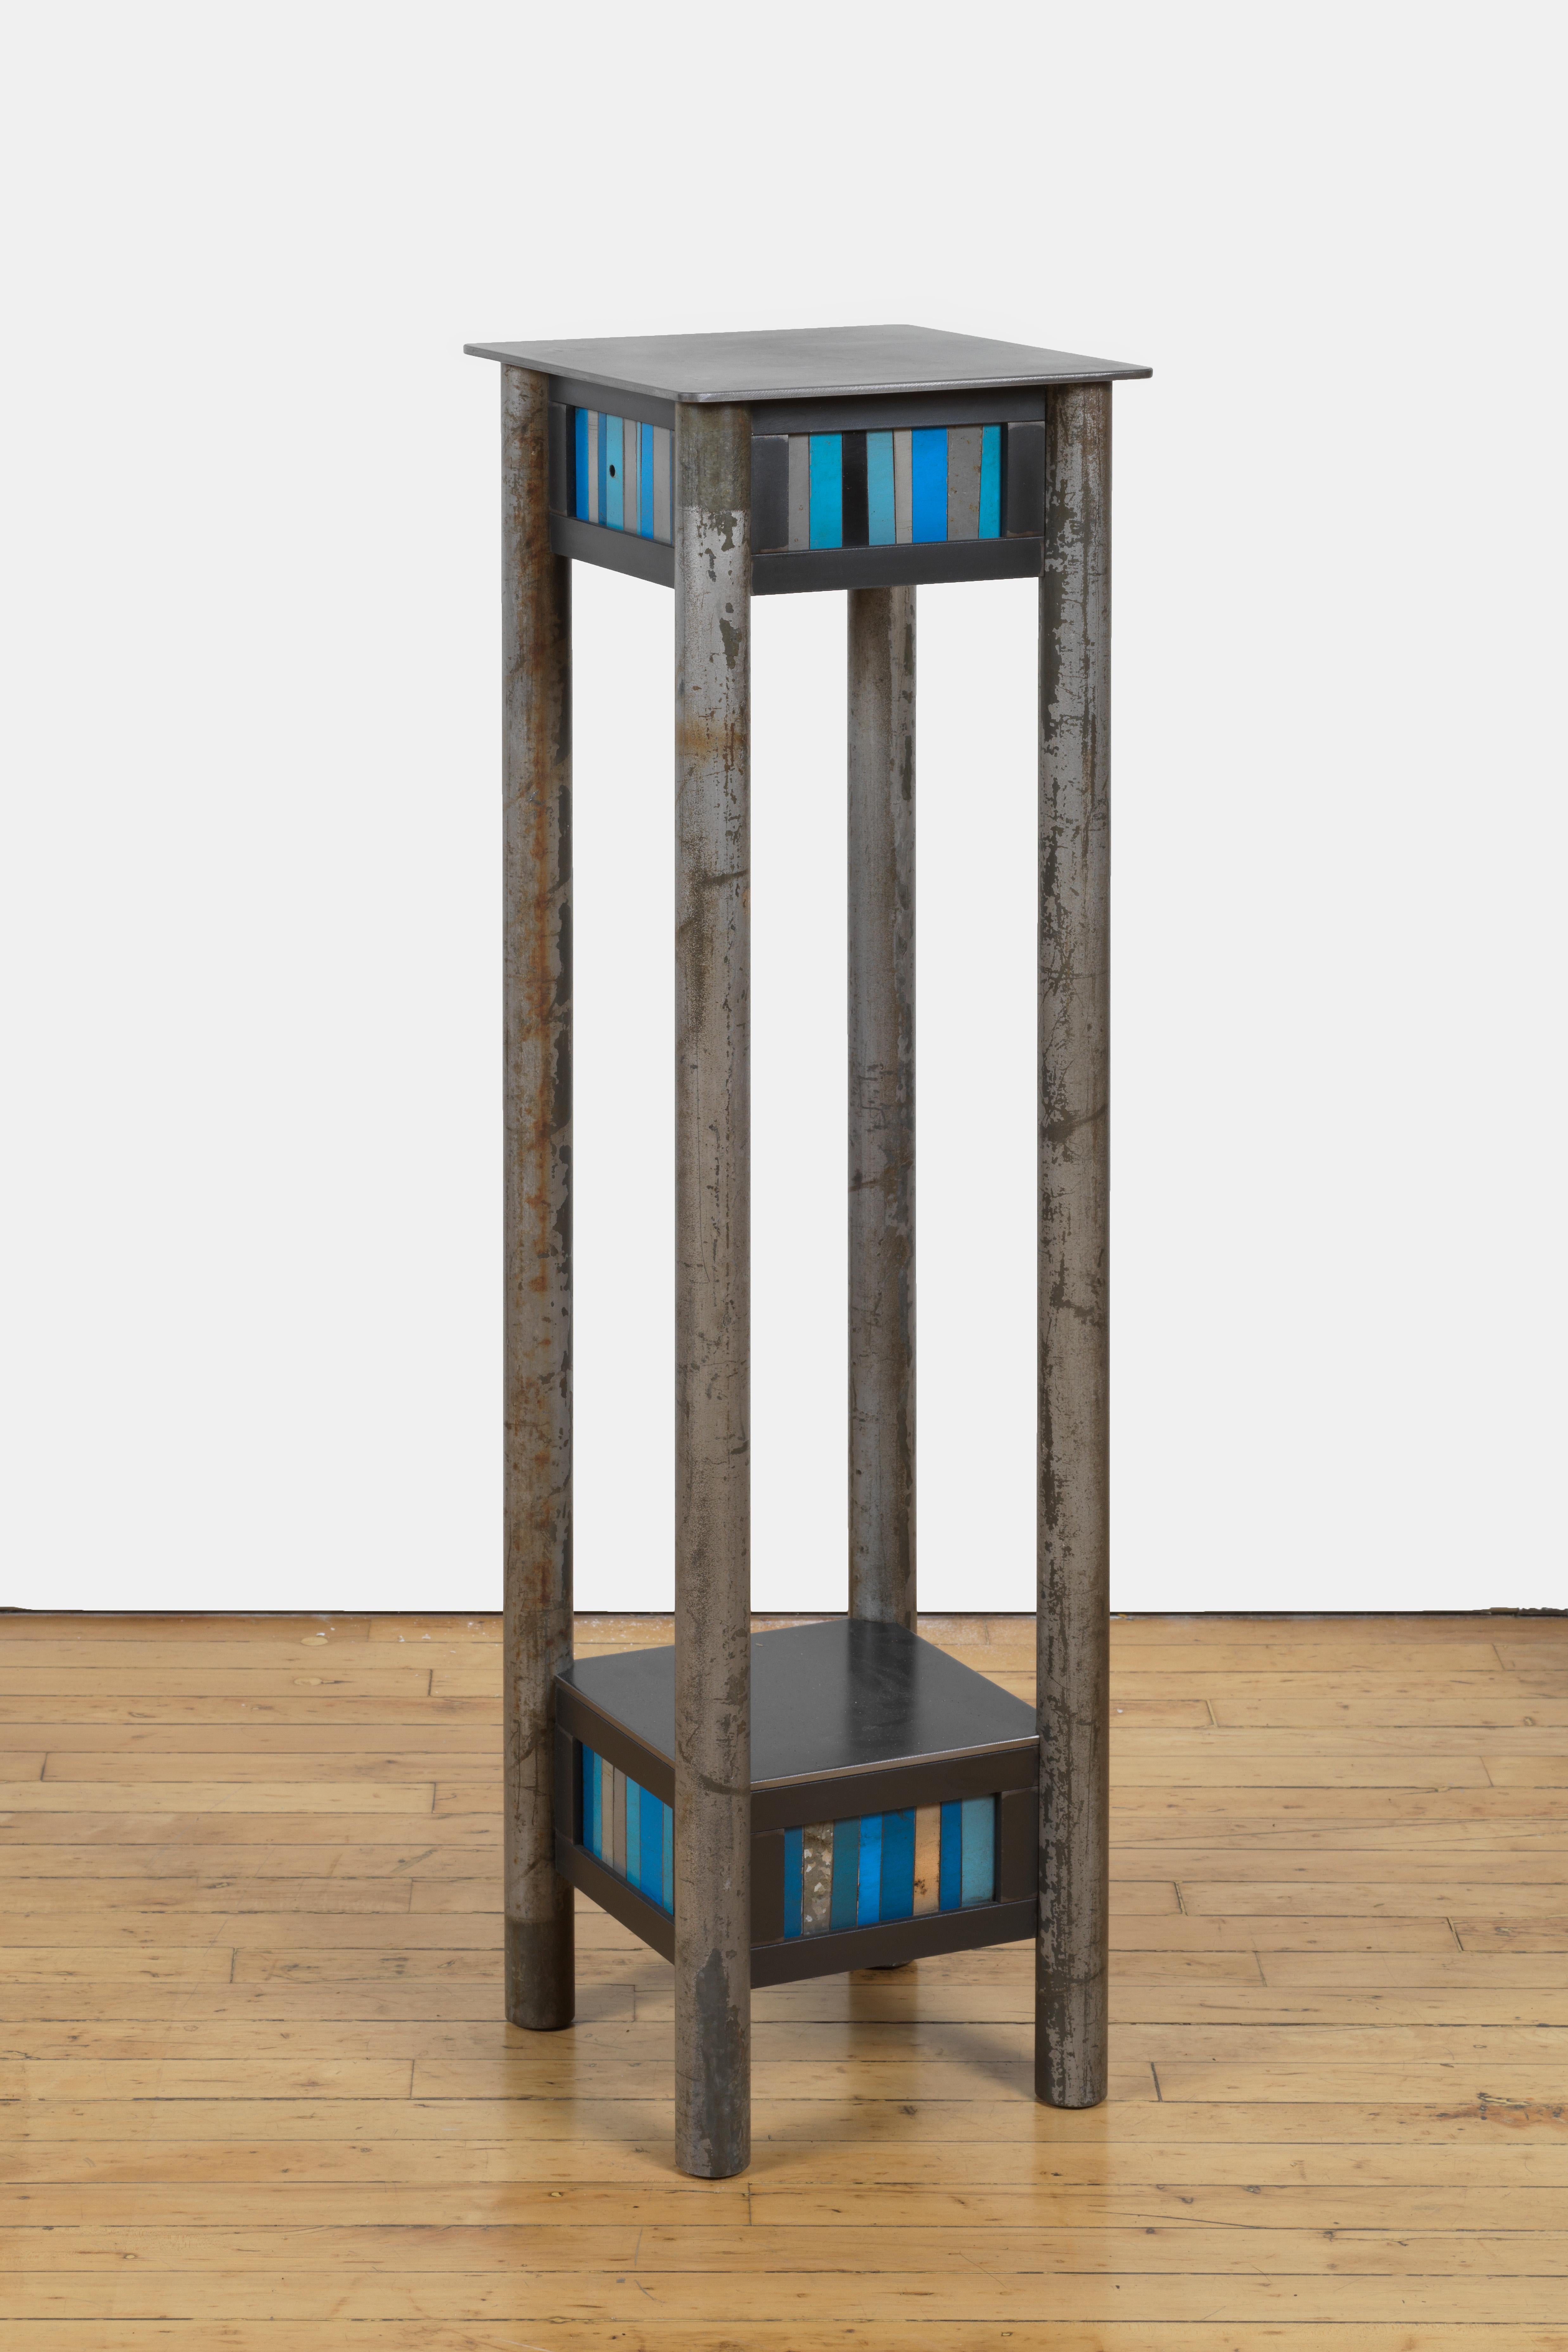 This is a welded steel pedestal with a low shelf and a quilted skirt of found metal strips arranged in a quilt pattern inspired by the quilts of Gee's Bend Alabama. Each piece of furniture is unique and made by Jim Rose. The skirt contains a mix of